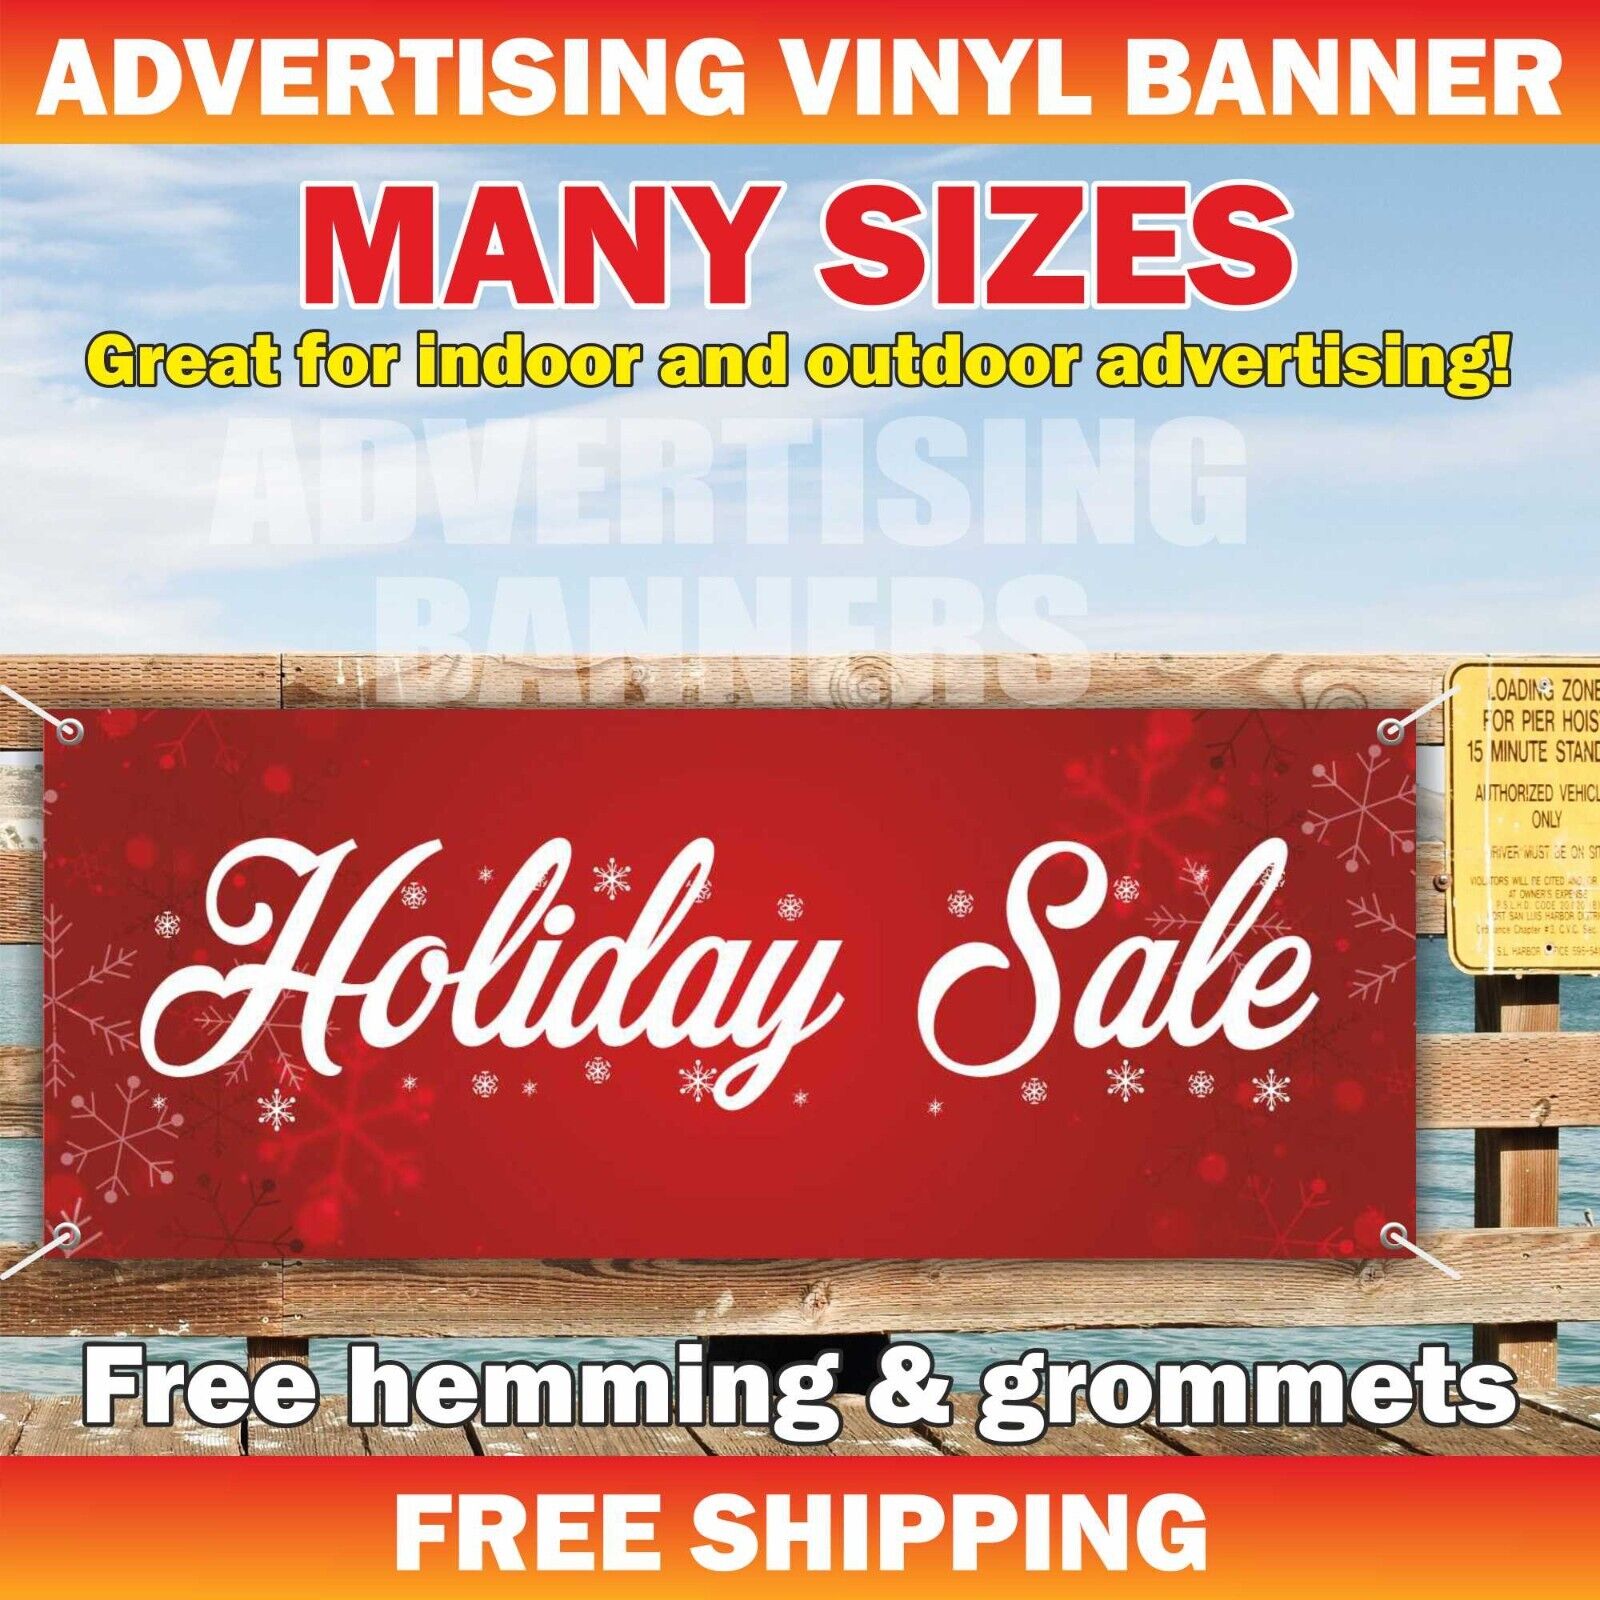 Holiday Sale Advertising Banner Vinyl Mesh Sign Merry Christmas Xmas New Year